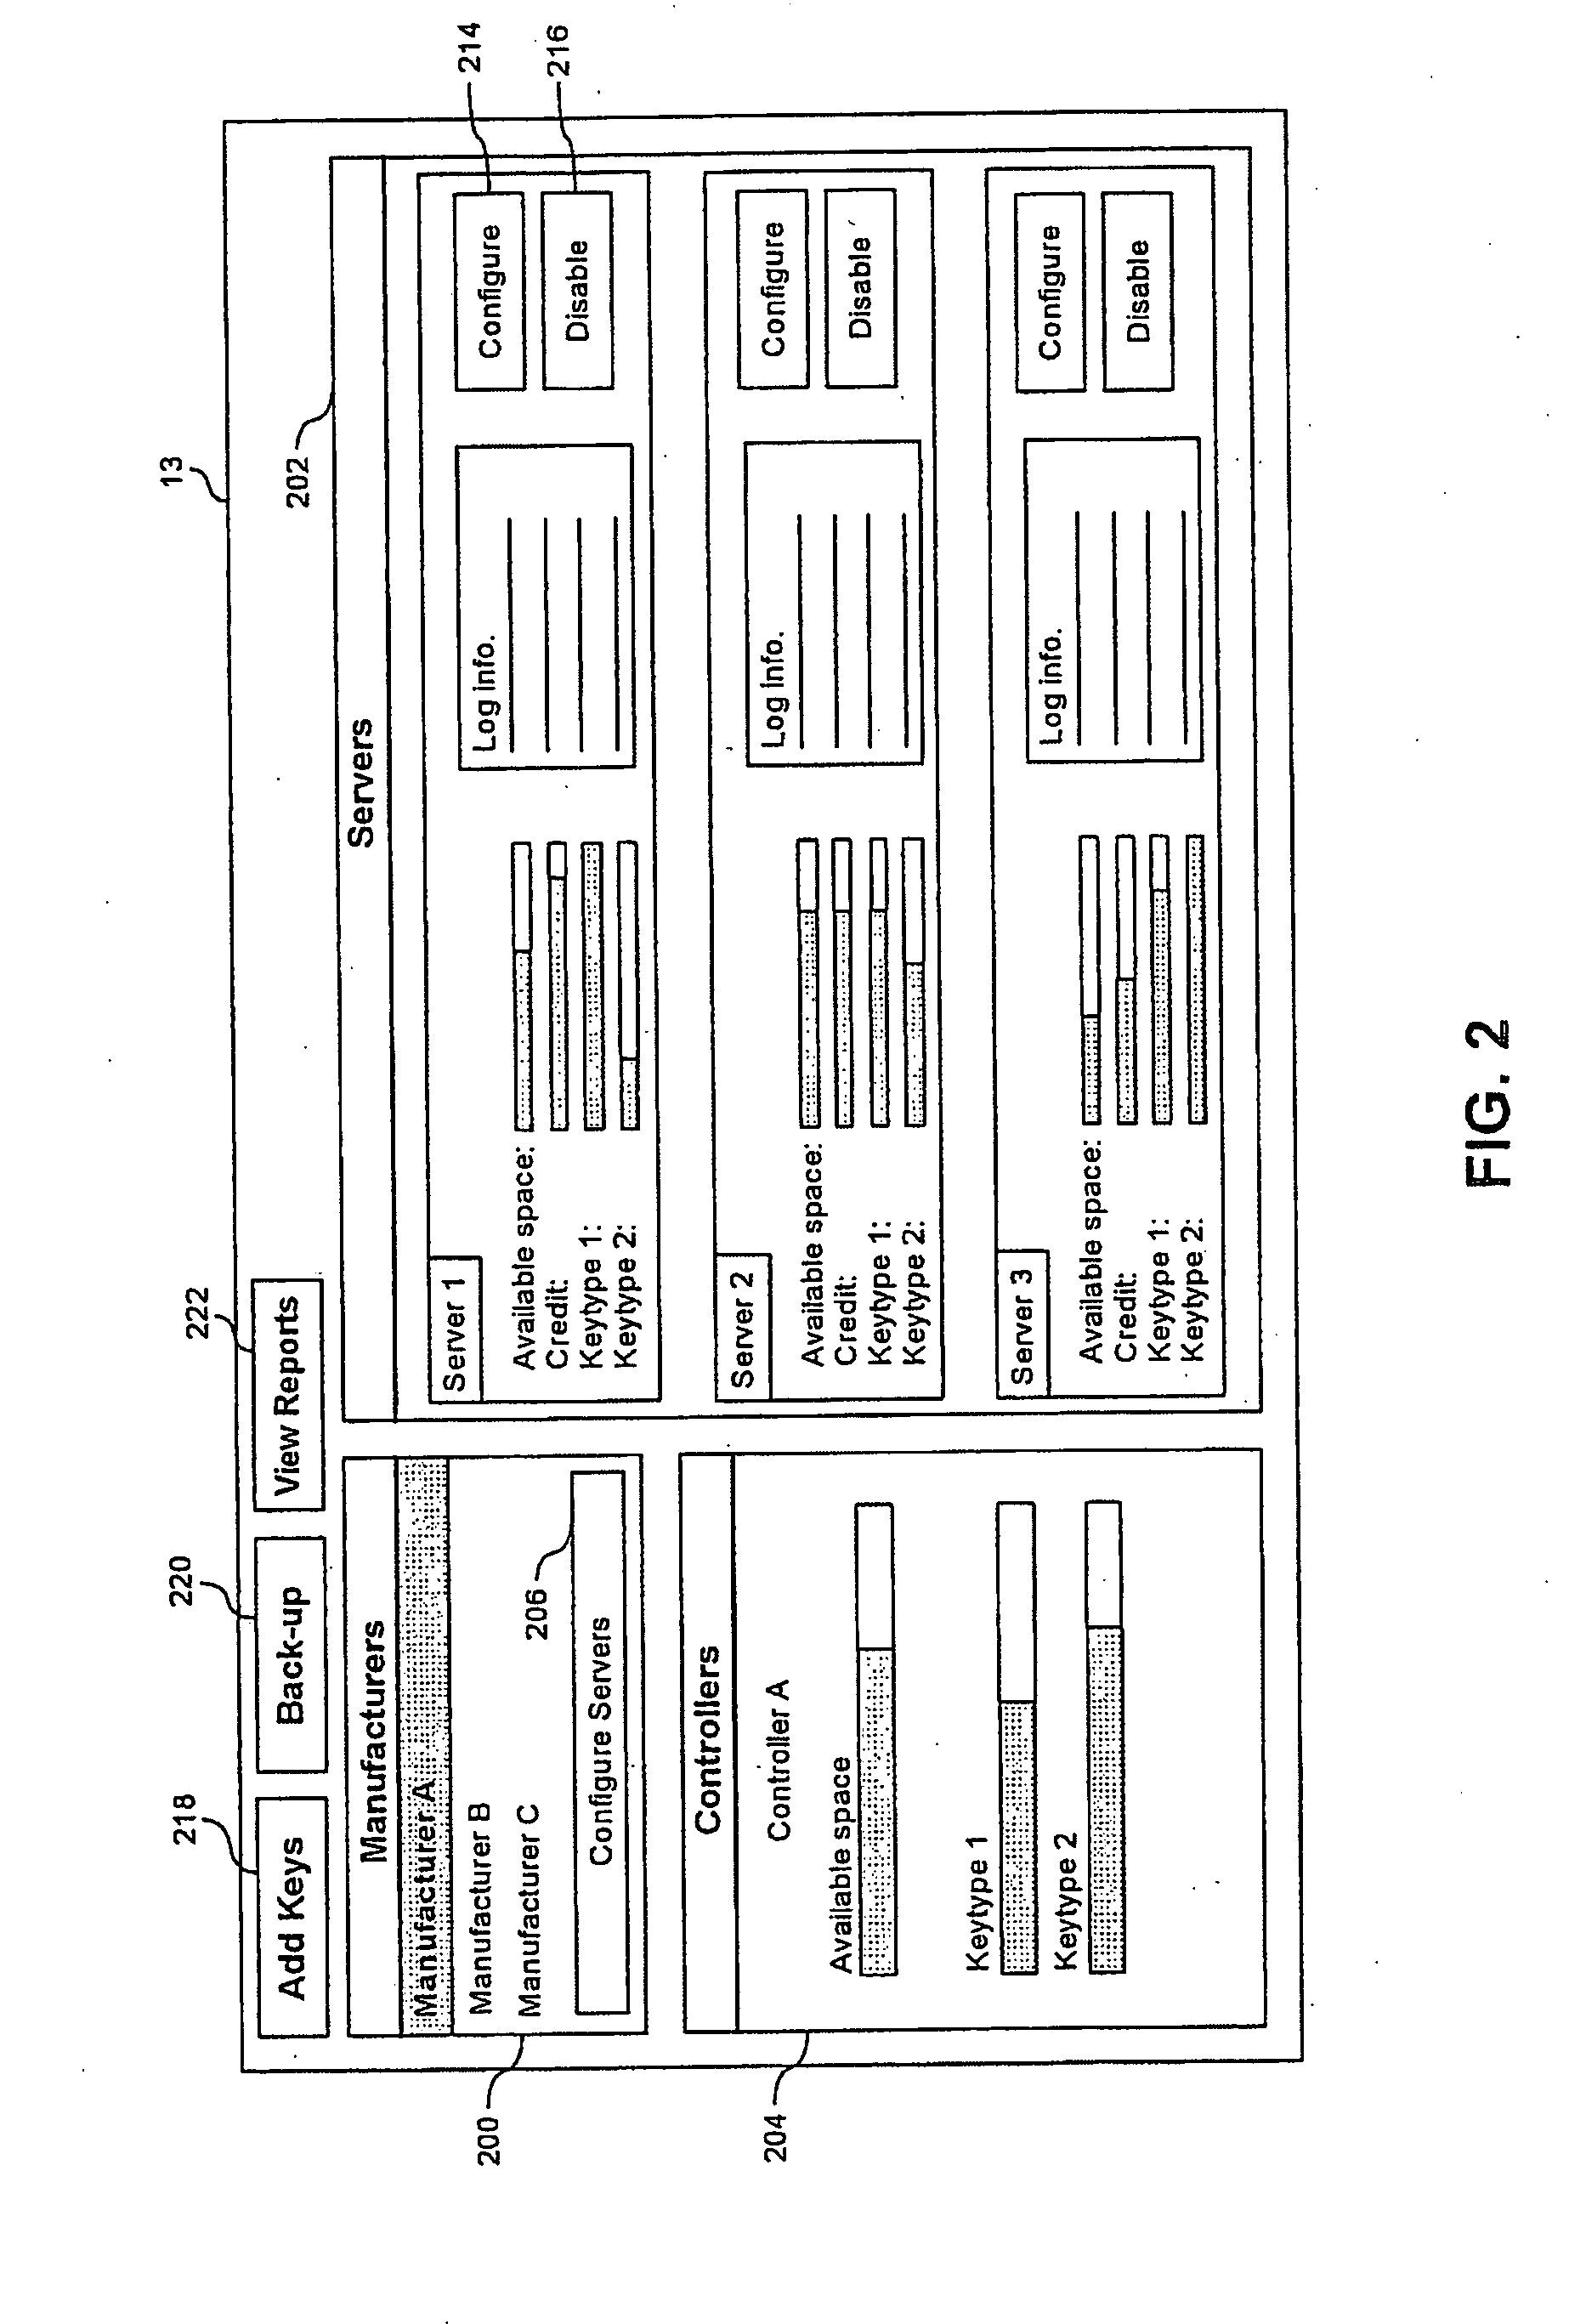 System and method for product registration